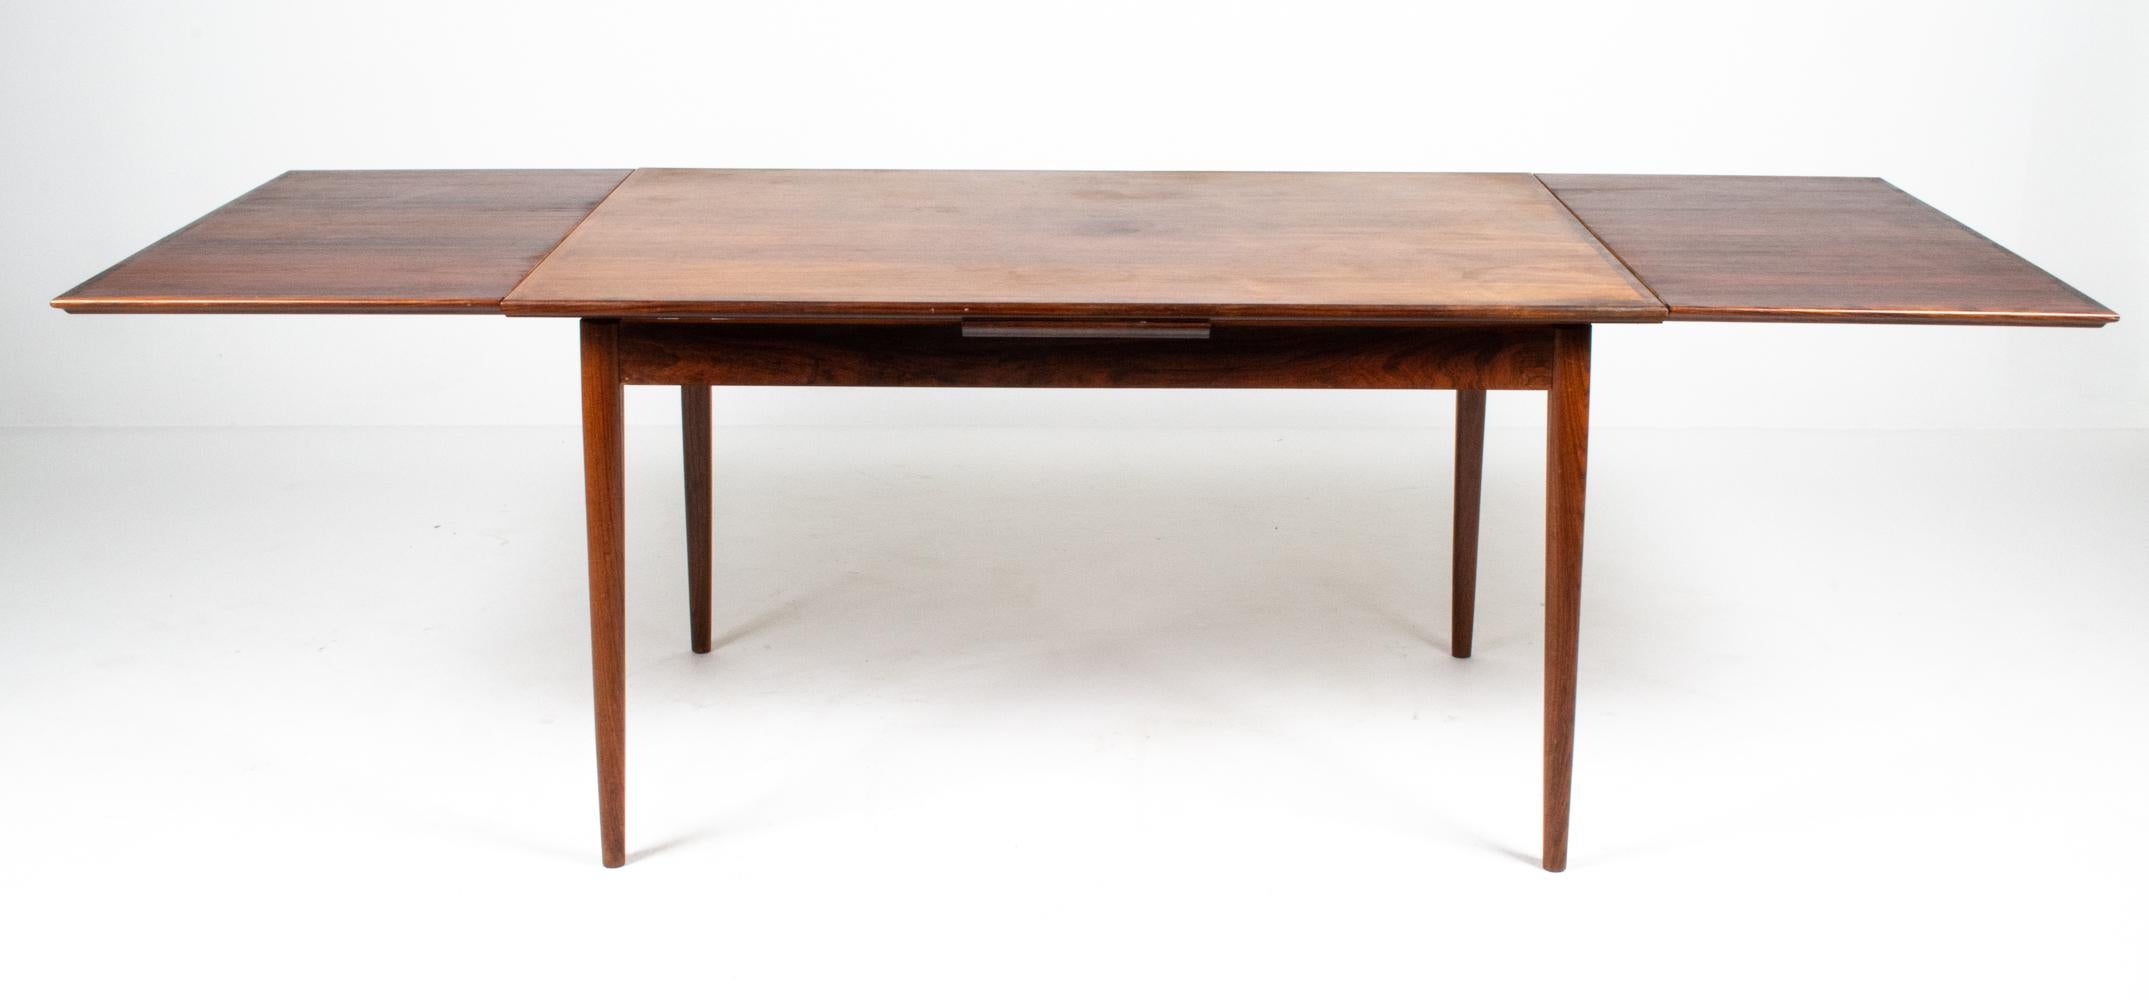 Danish Mid-Century Rosewood Extension Dining Table, c. 1960's For Sale 7